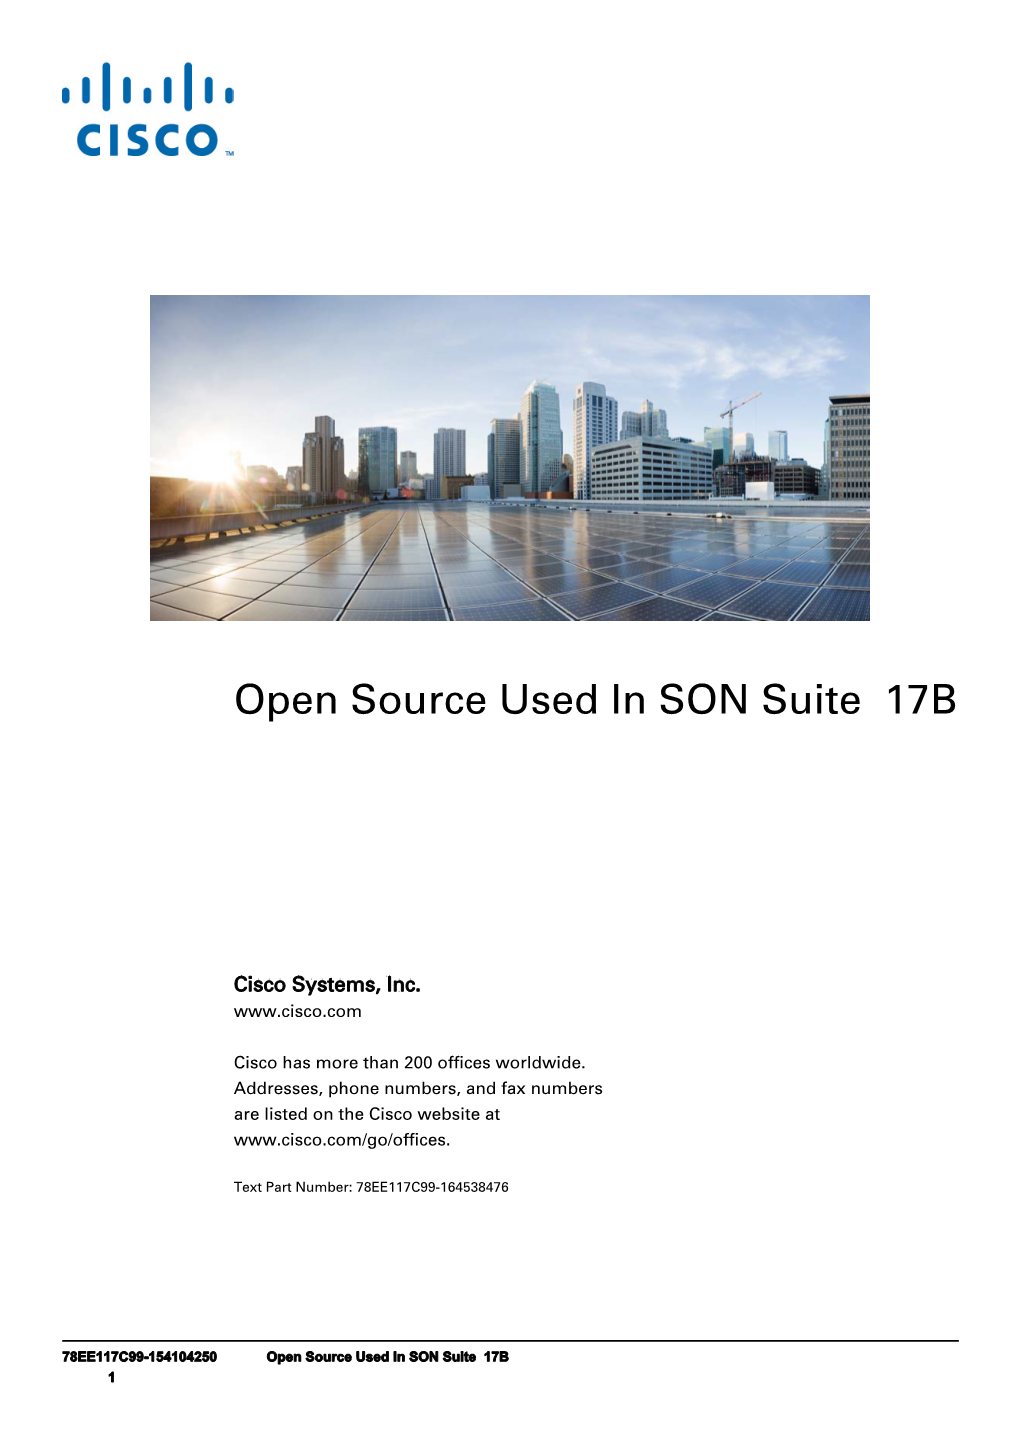 Open Source Used in SON Suite 17B